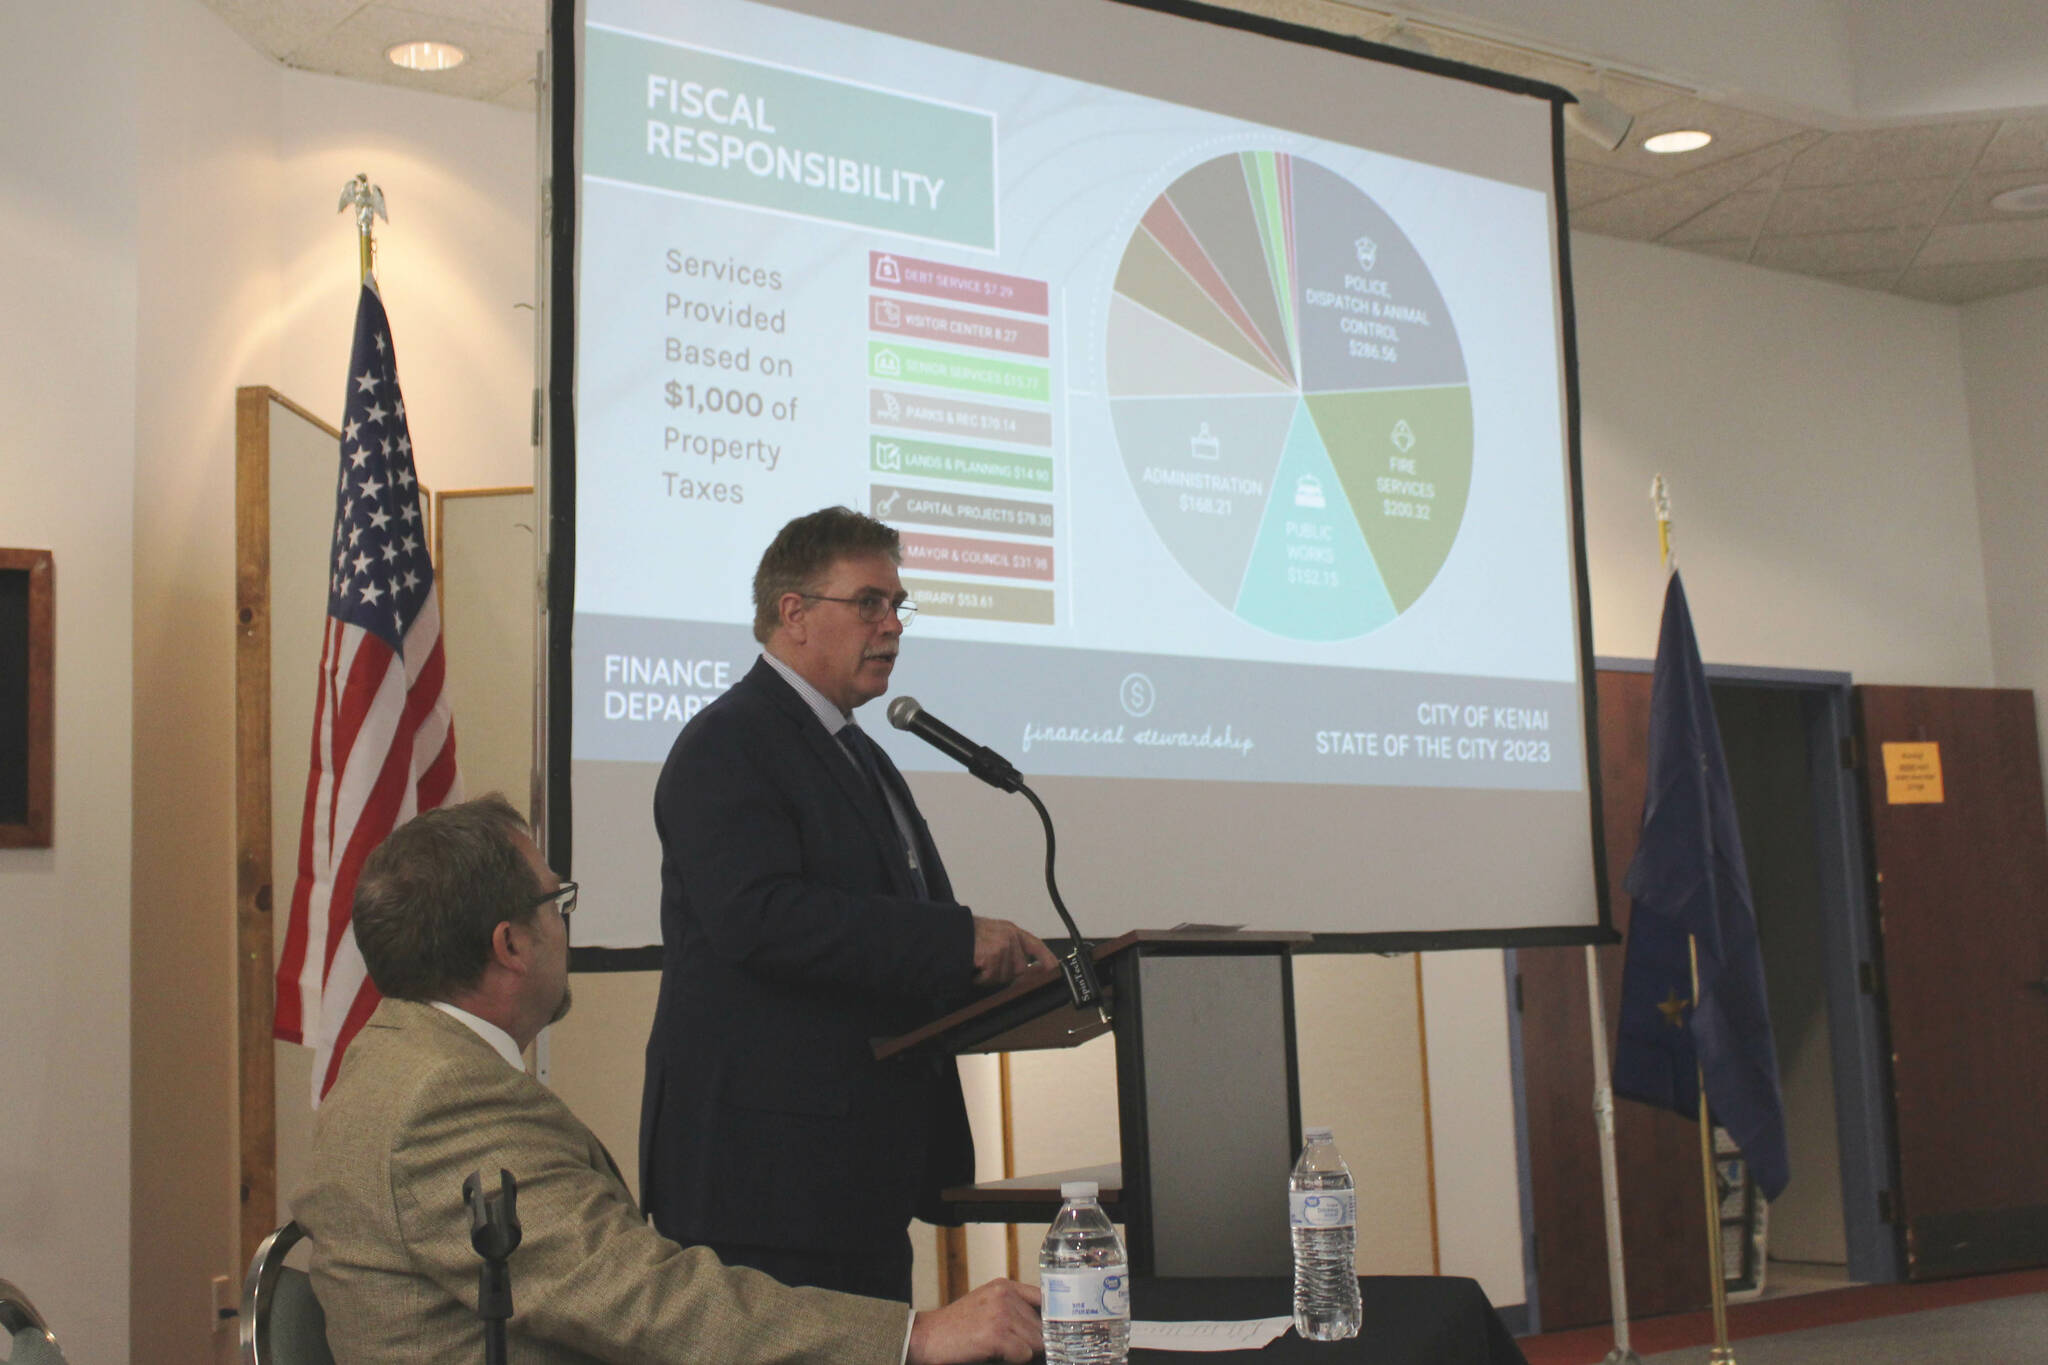 Kenai City Manager Terry Eubank (left) and Kenai Mayor Brian Gabriel (right) present the annual “State of the City” address at the Kenai Chamber of Commerce and Visitor Center on Wednesday, April 5, 2023 in Kenai, Alaska. (Ashlyn O’Hara/Peninsula Clarion)